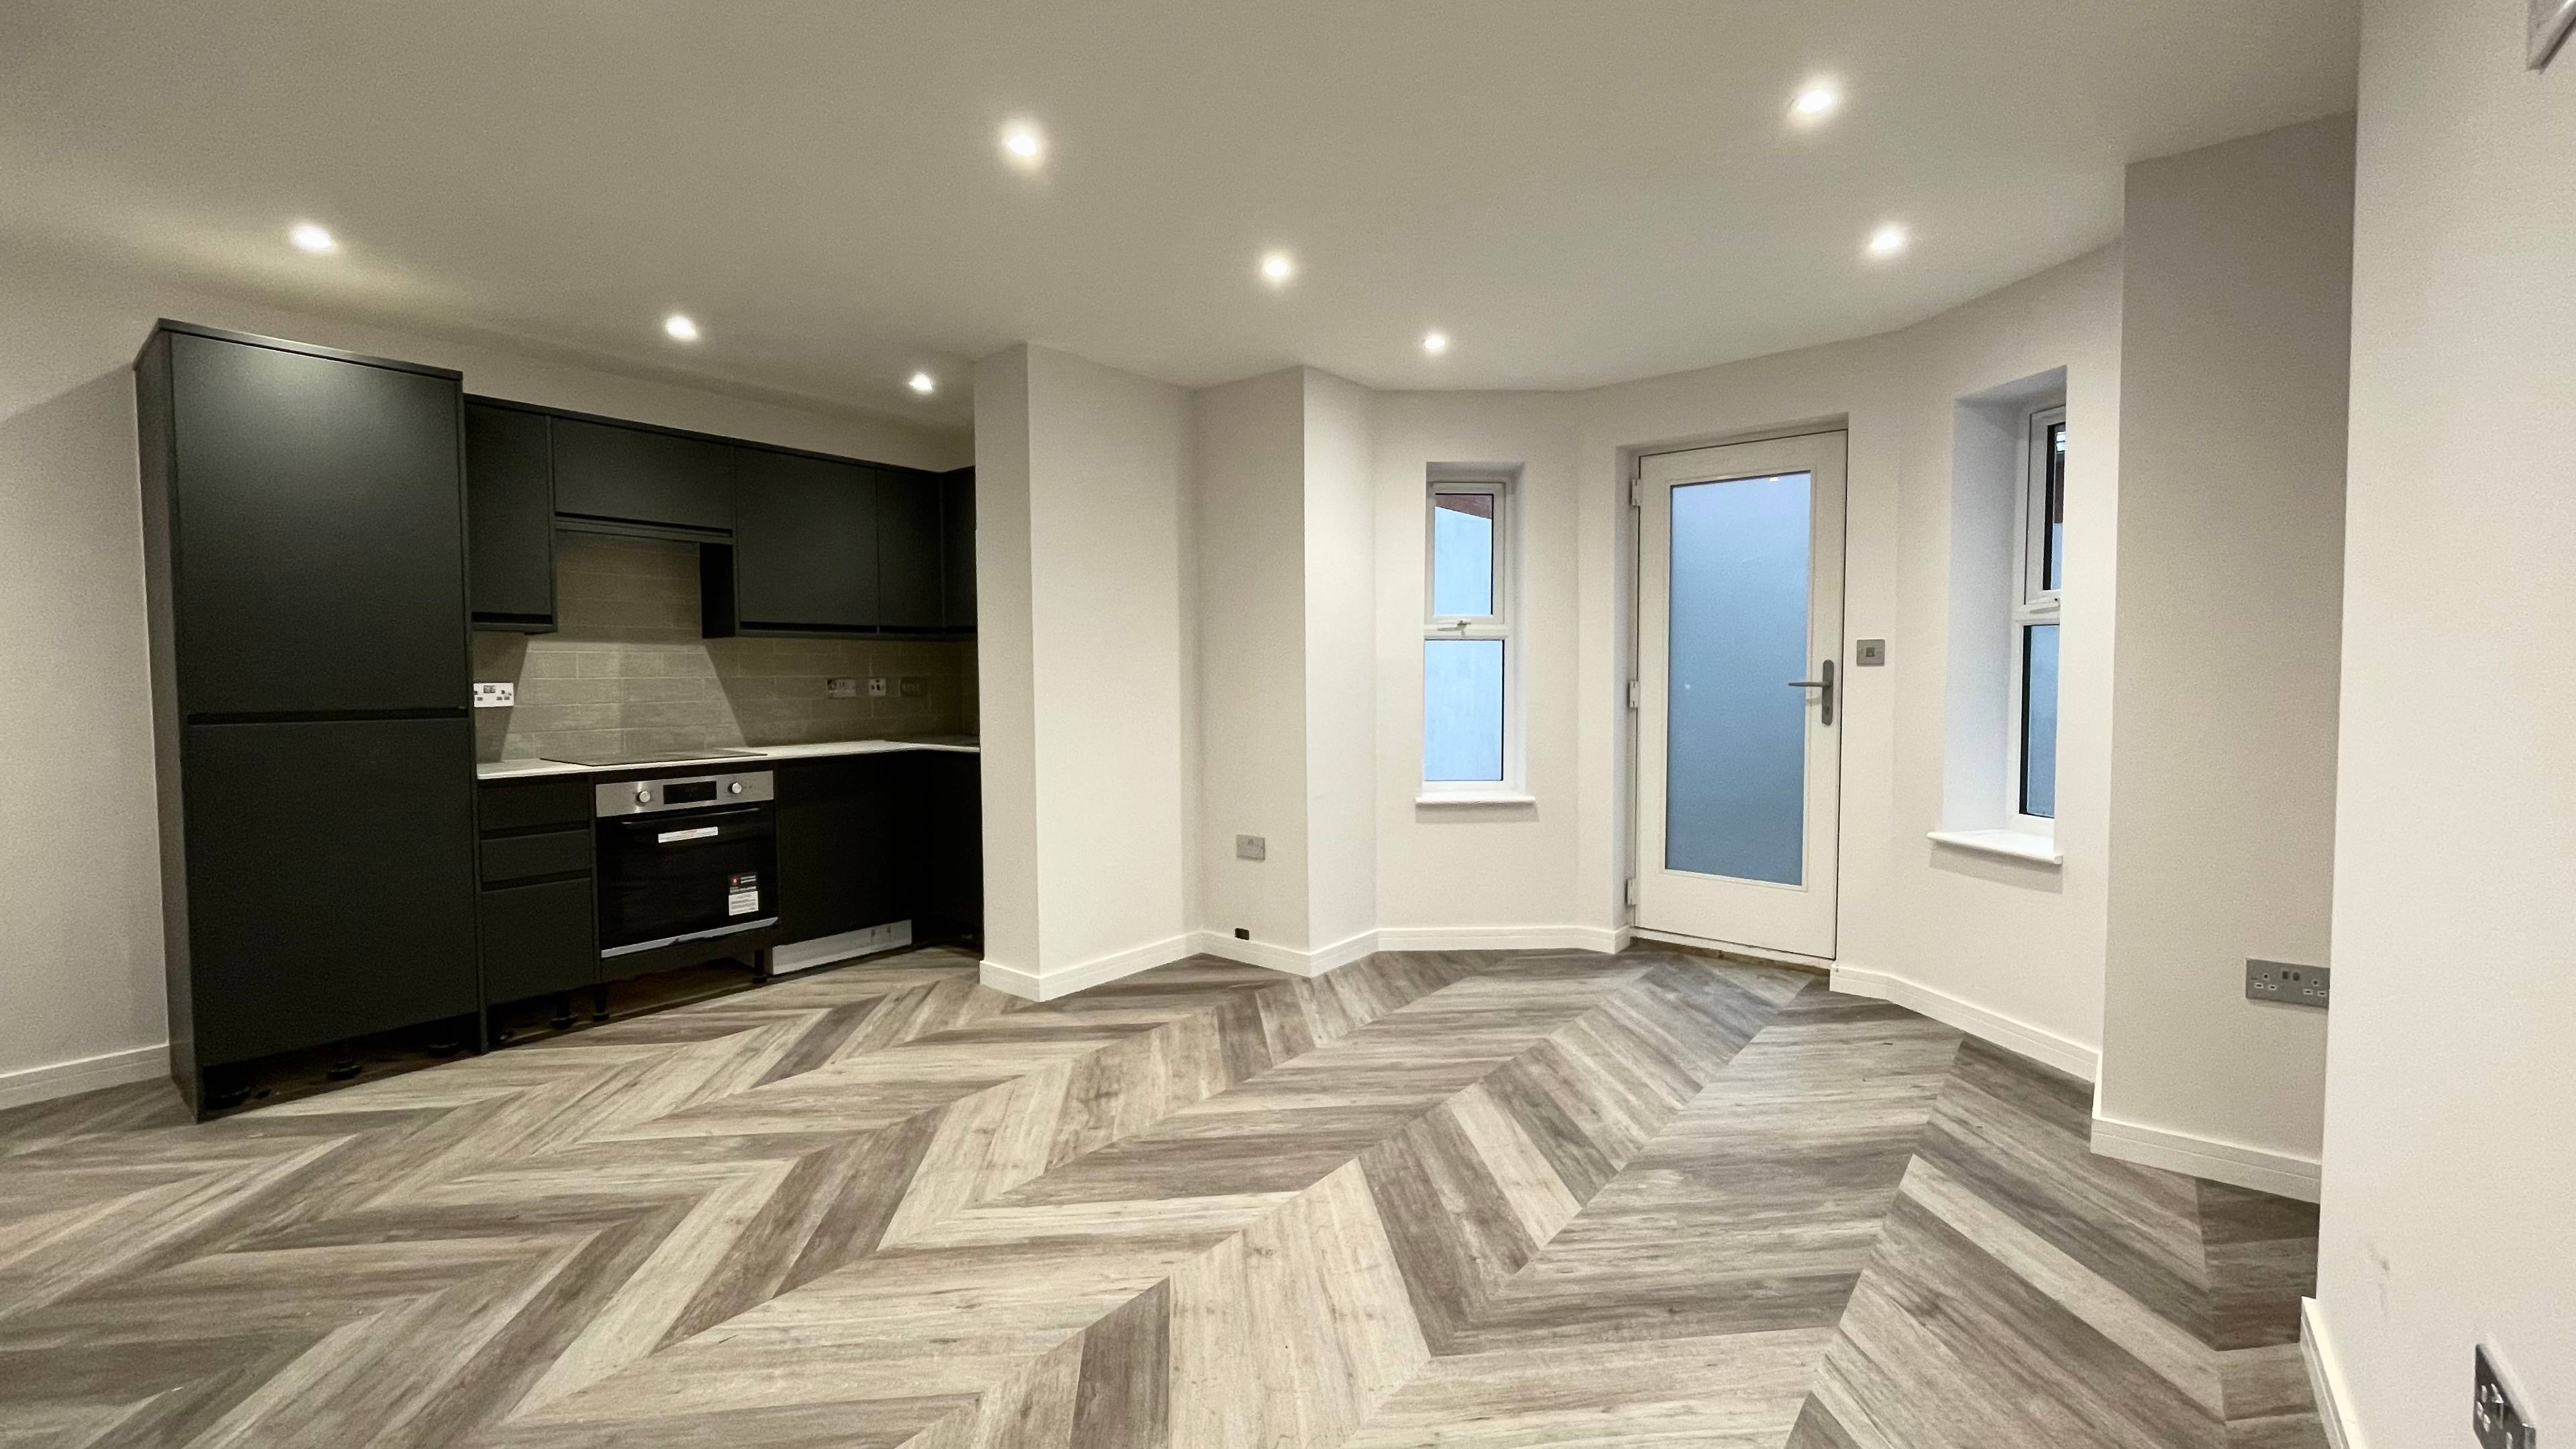 Luxury basement living is now here in Didsbury. Five stunning basement apartments available now.